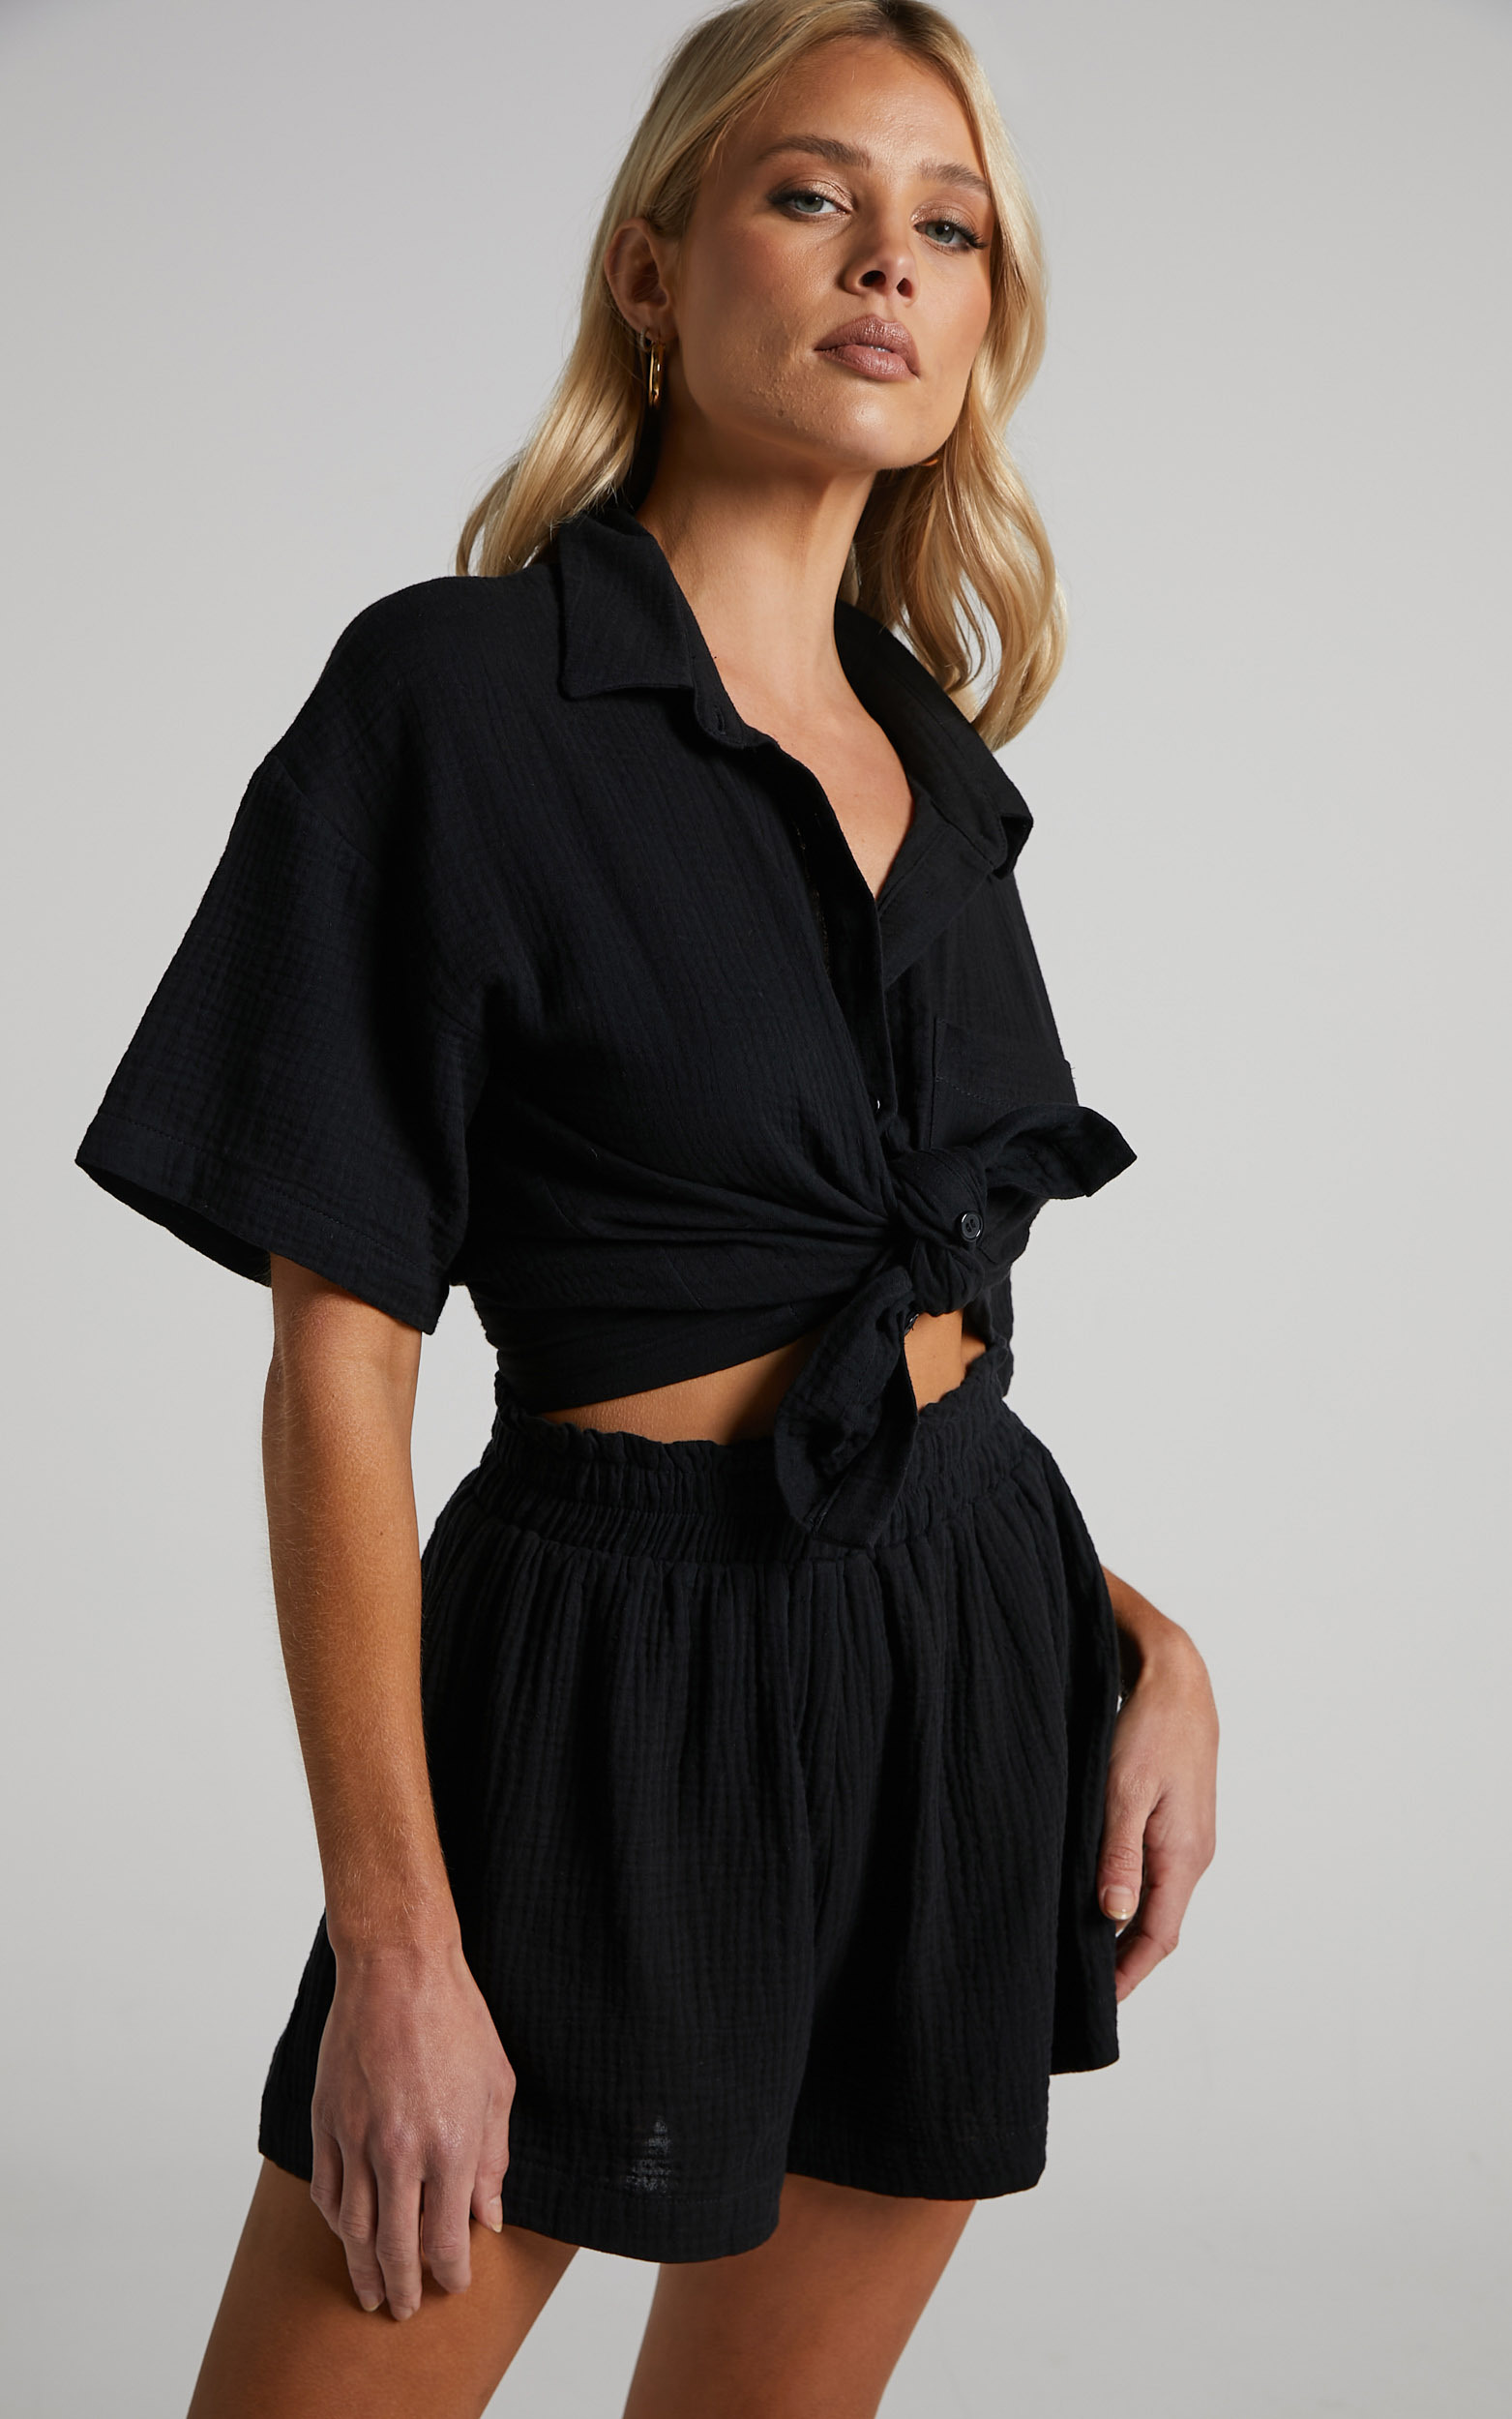 Donita Button up Shirt in Black - 04, BLK1, hi-res image number null